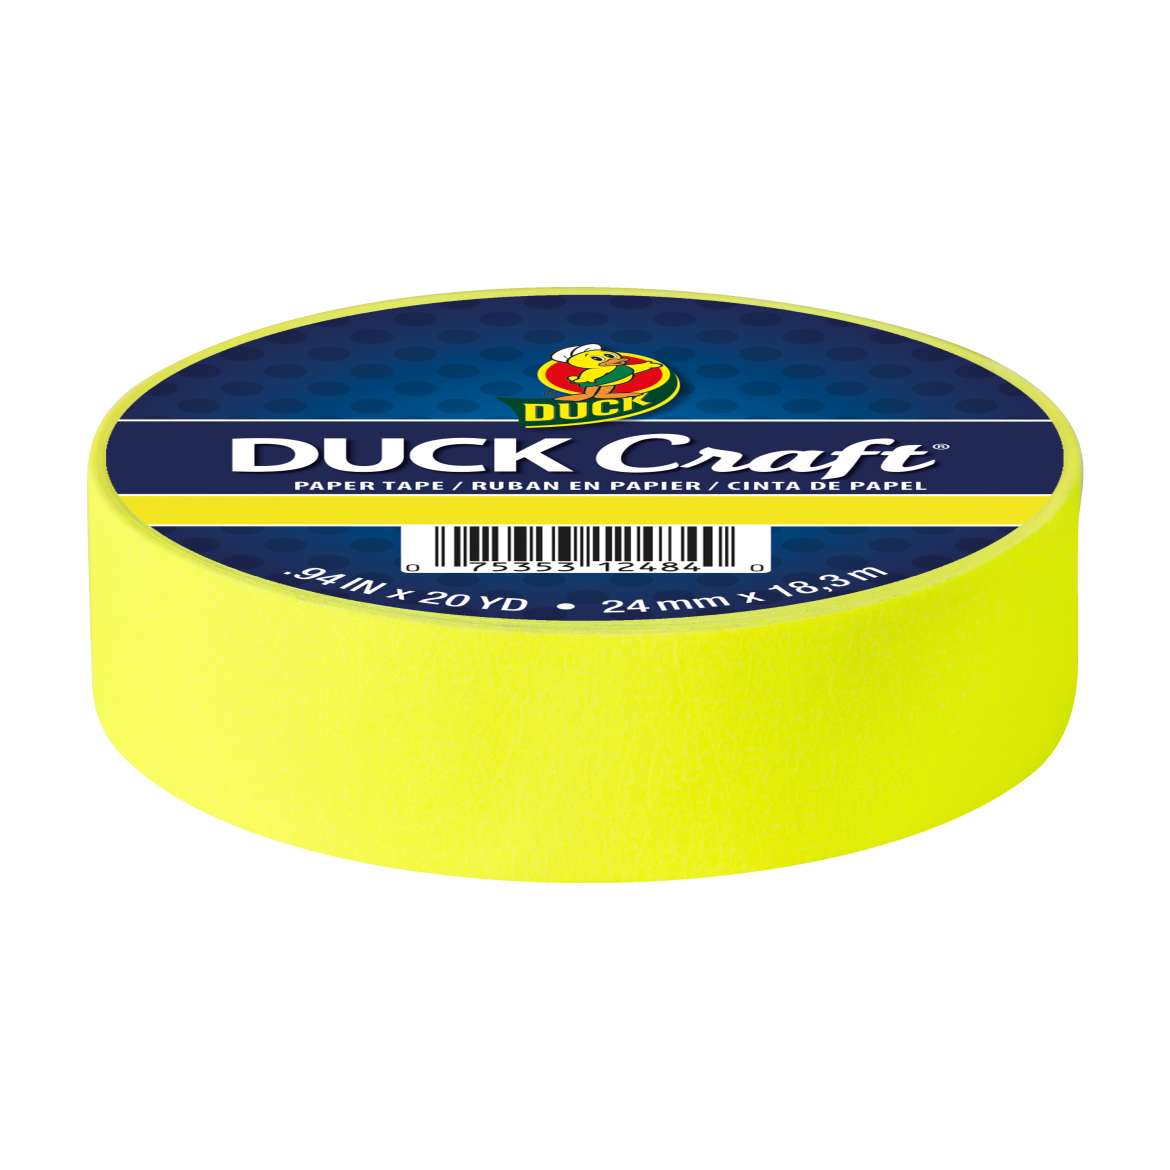 Duck Craft® Paper Tapes